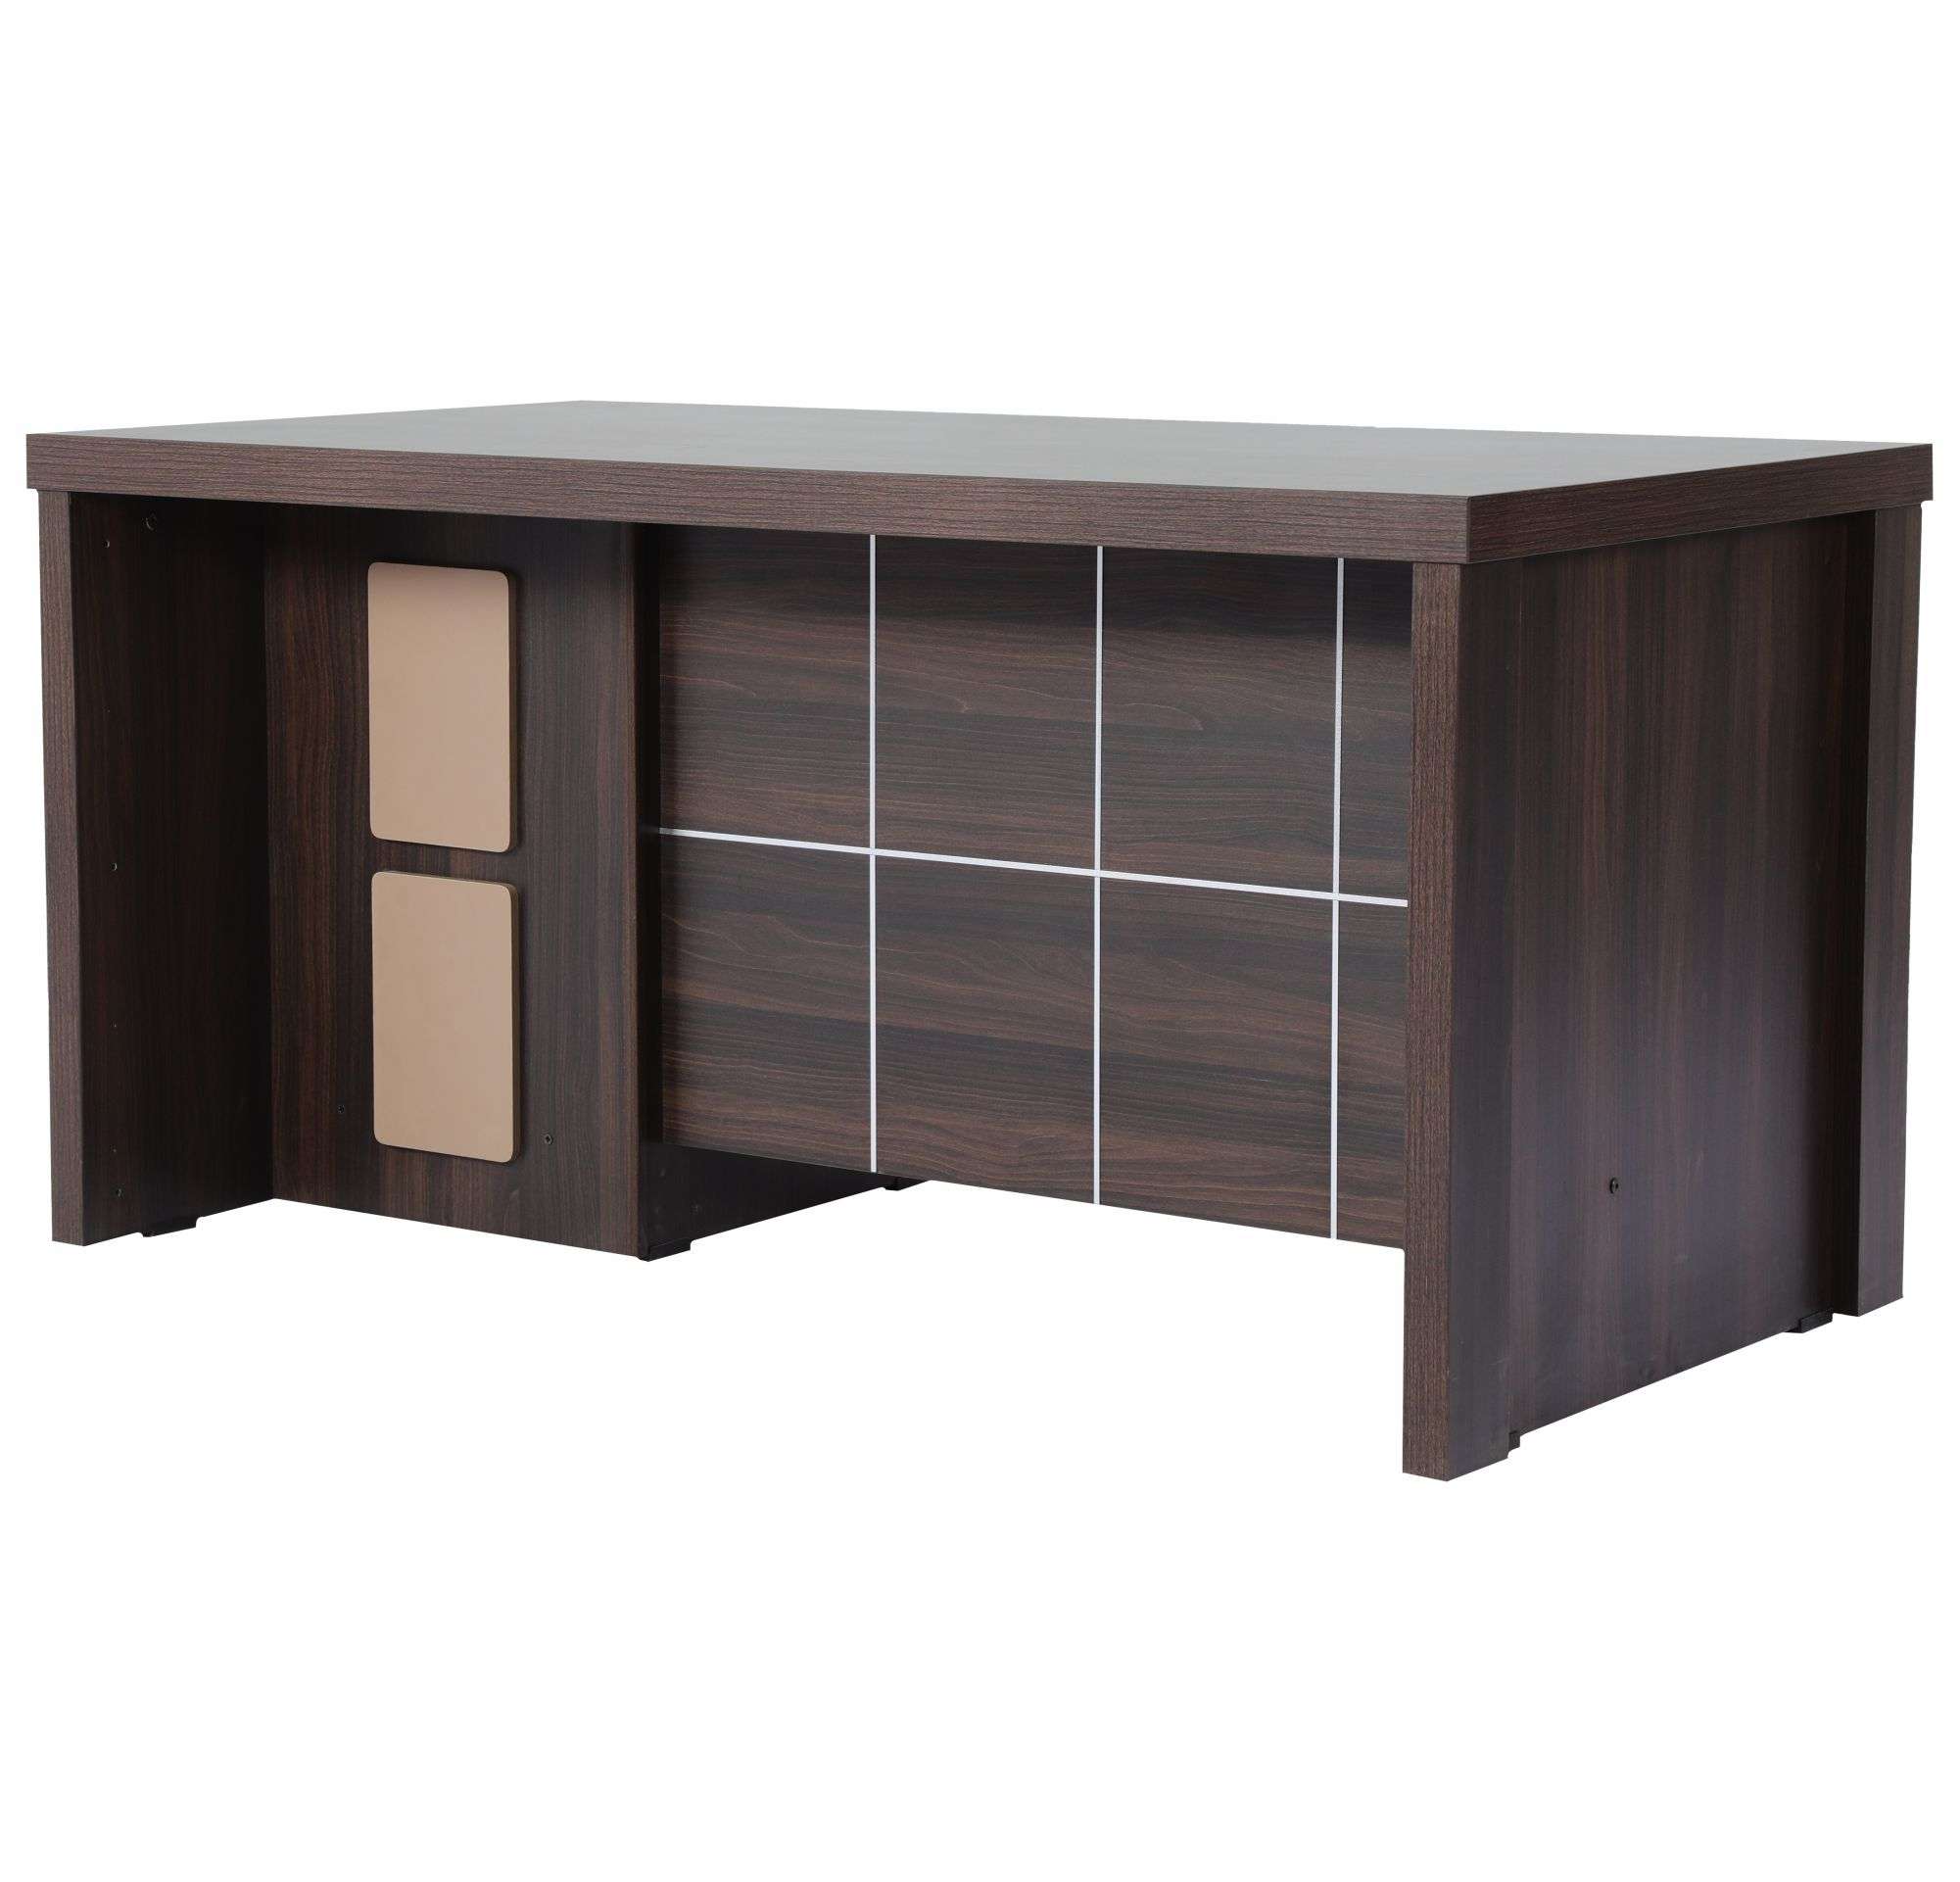 KWT081-Writing Table With 3 Drawers & 1 Door-M42/M51